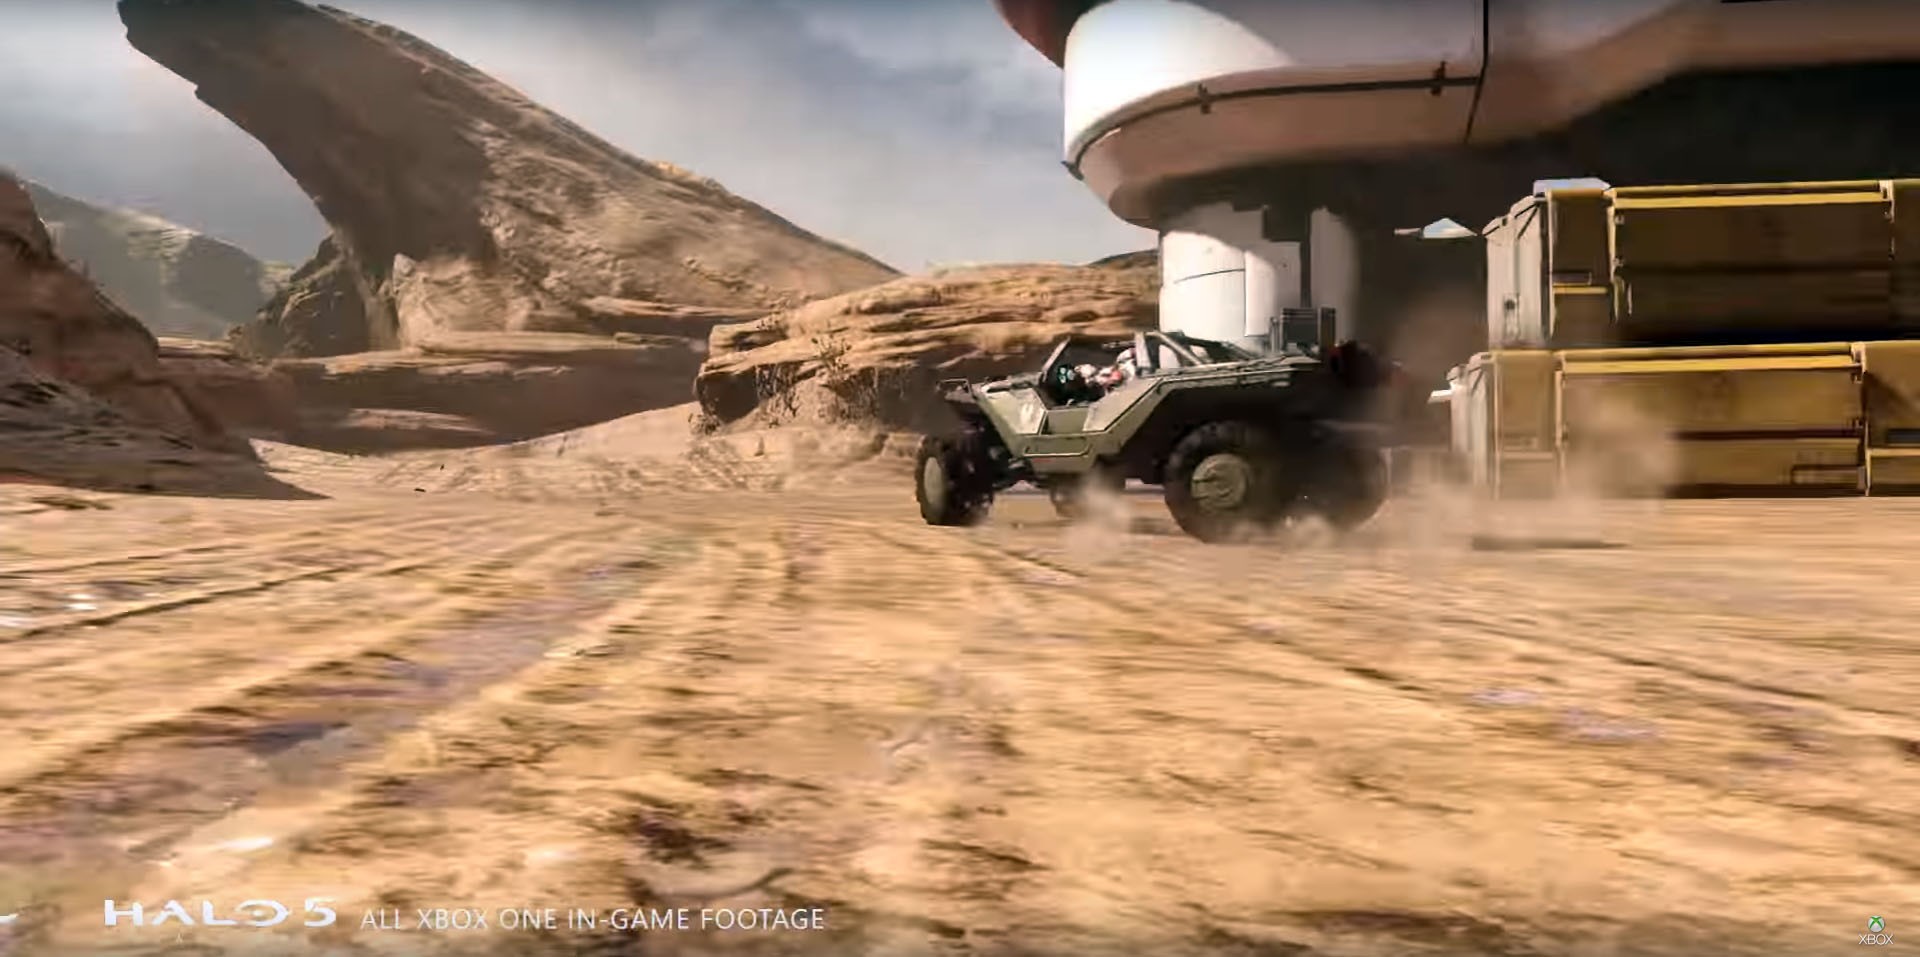 The Halo Warthog will feature in Forza Horizon 3 as a free download - Team  VVV